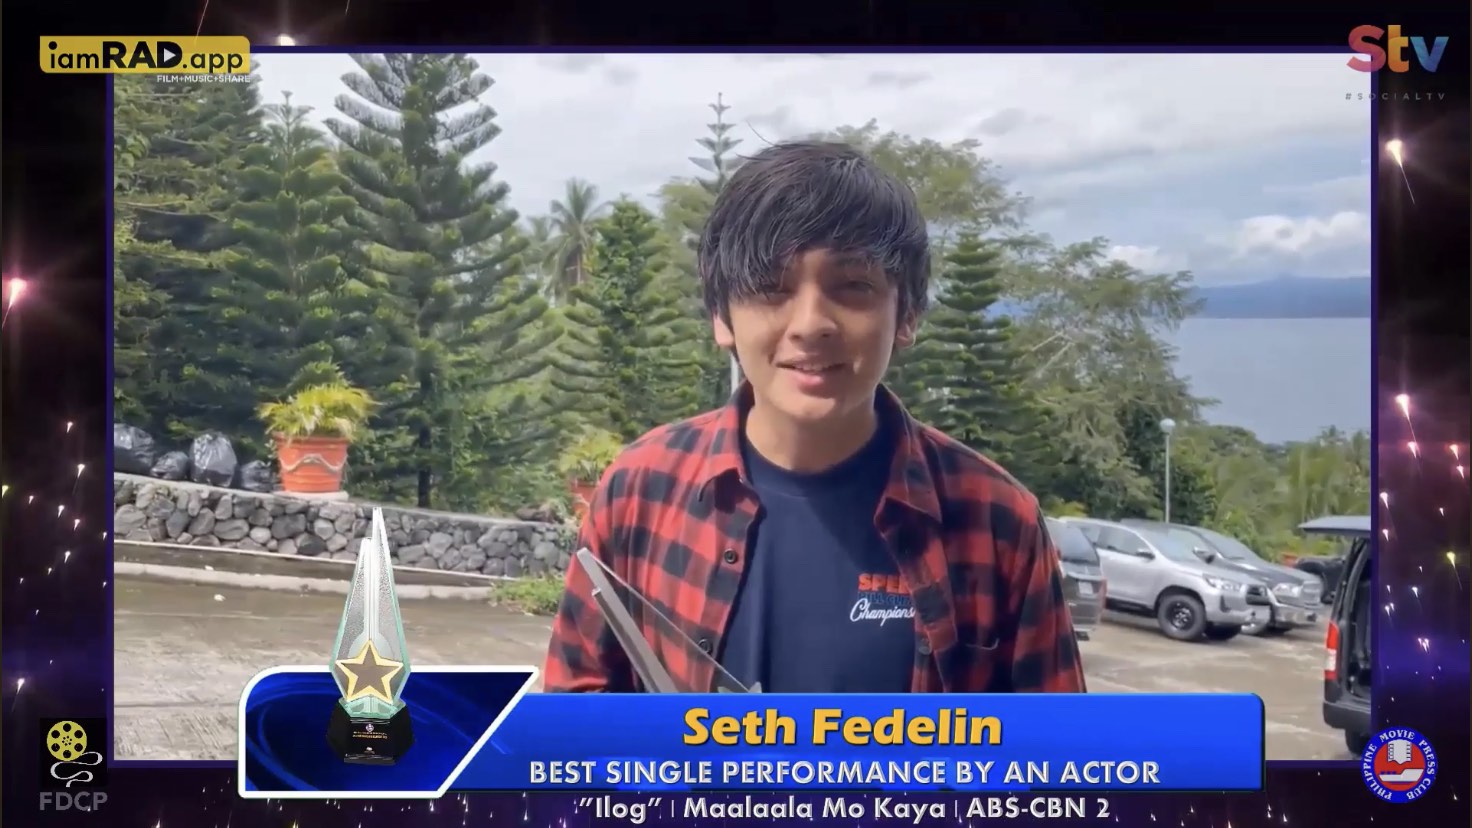 Seth Fedelin   Best Single Performance by An Actor, MMK Ilog episode